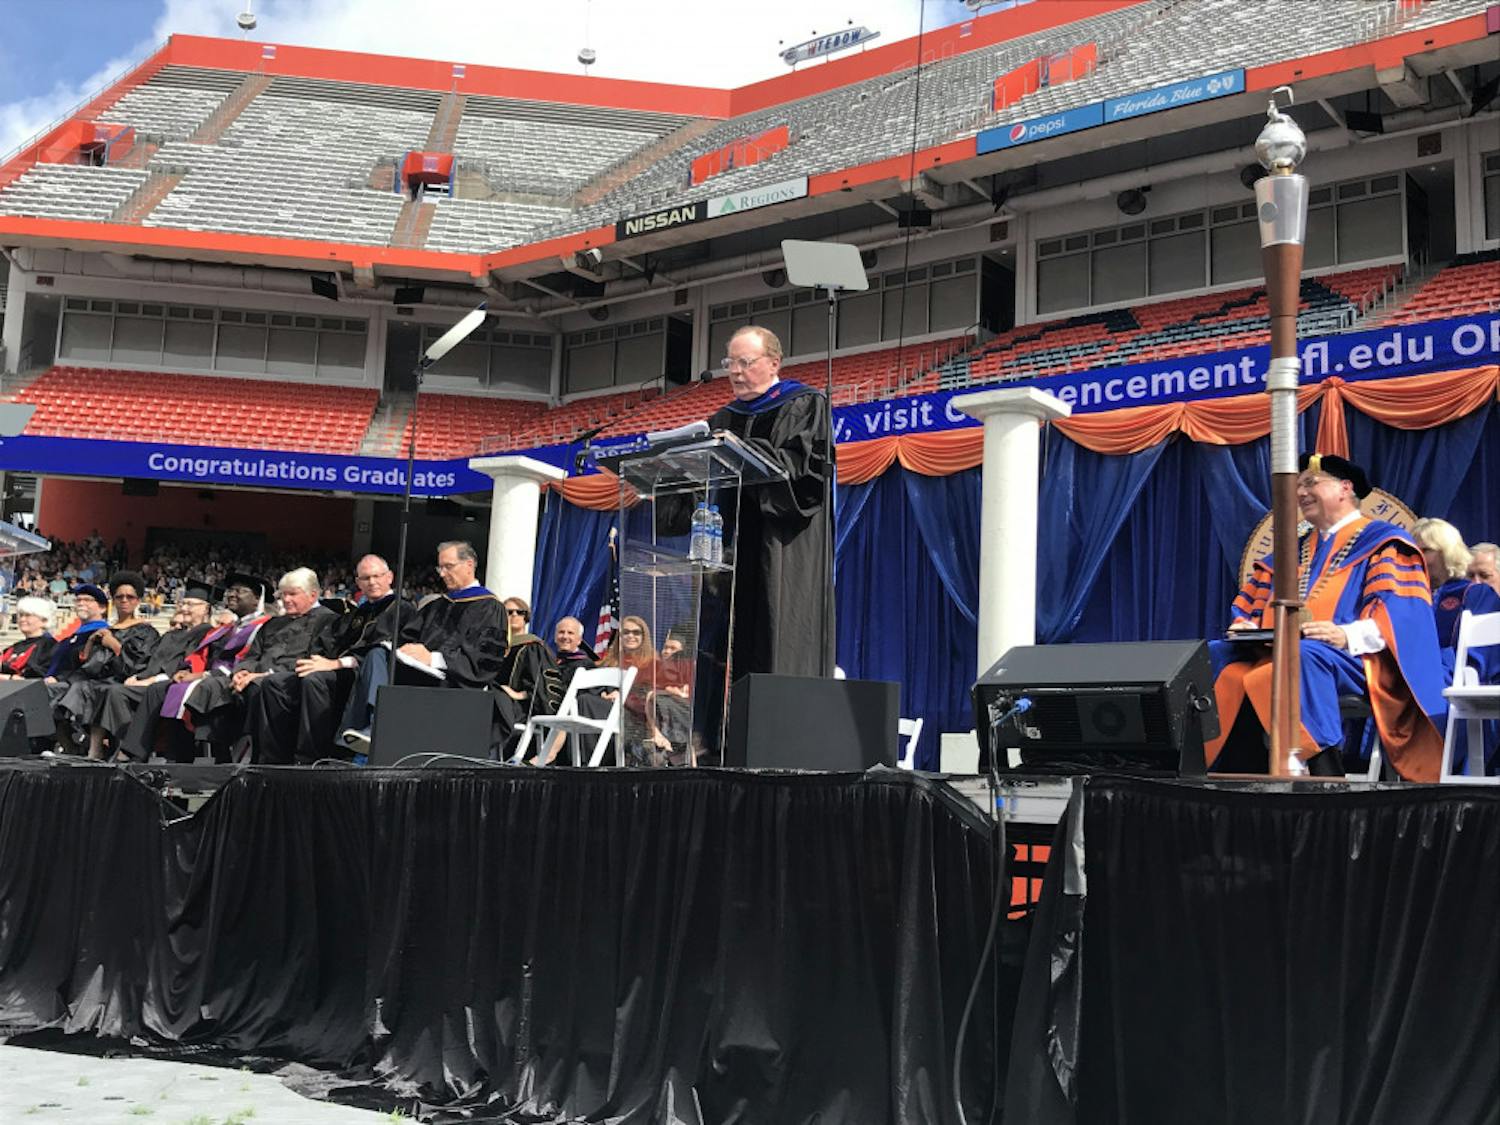 Bestselling author James Patterson speaks to an estimated 2,500 students at UF's university-wide commencement on Saturday. "If you only take one thing away from today, please take this: Passion is the key reason for choosing a career,” Patterson said.